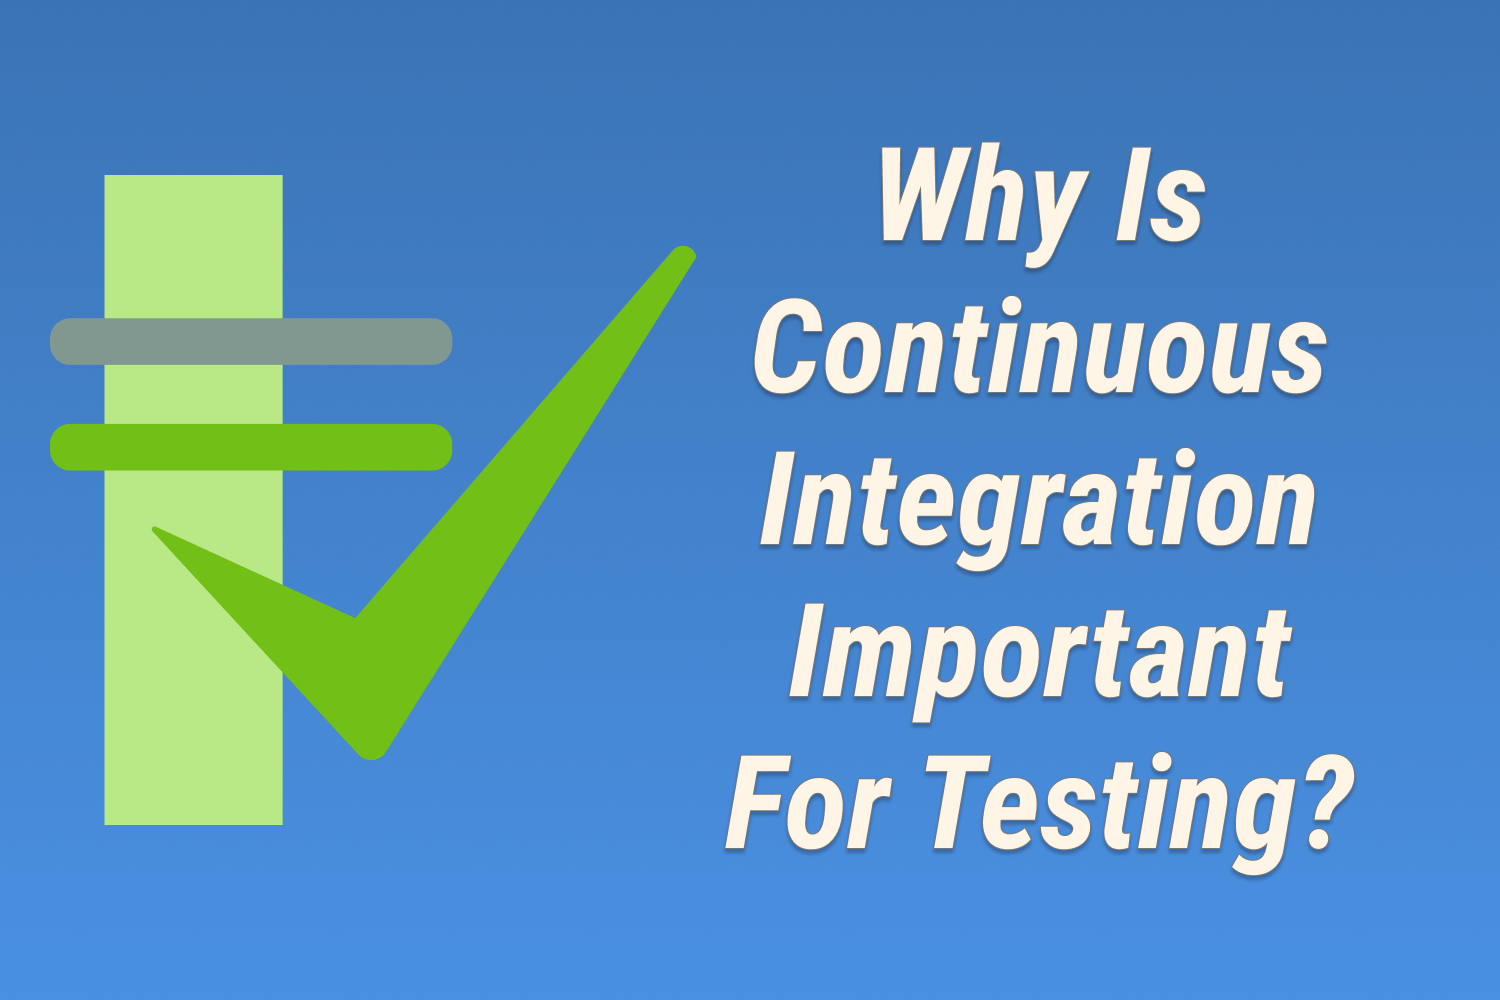 Why Is Continuous Integration Important For Testing?